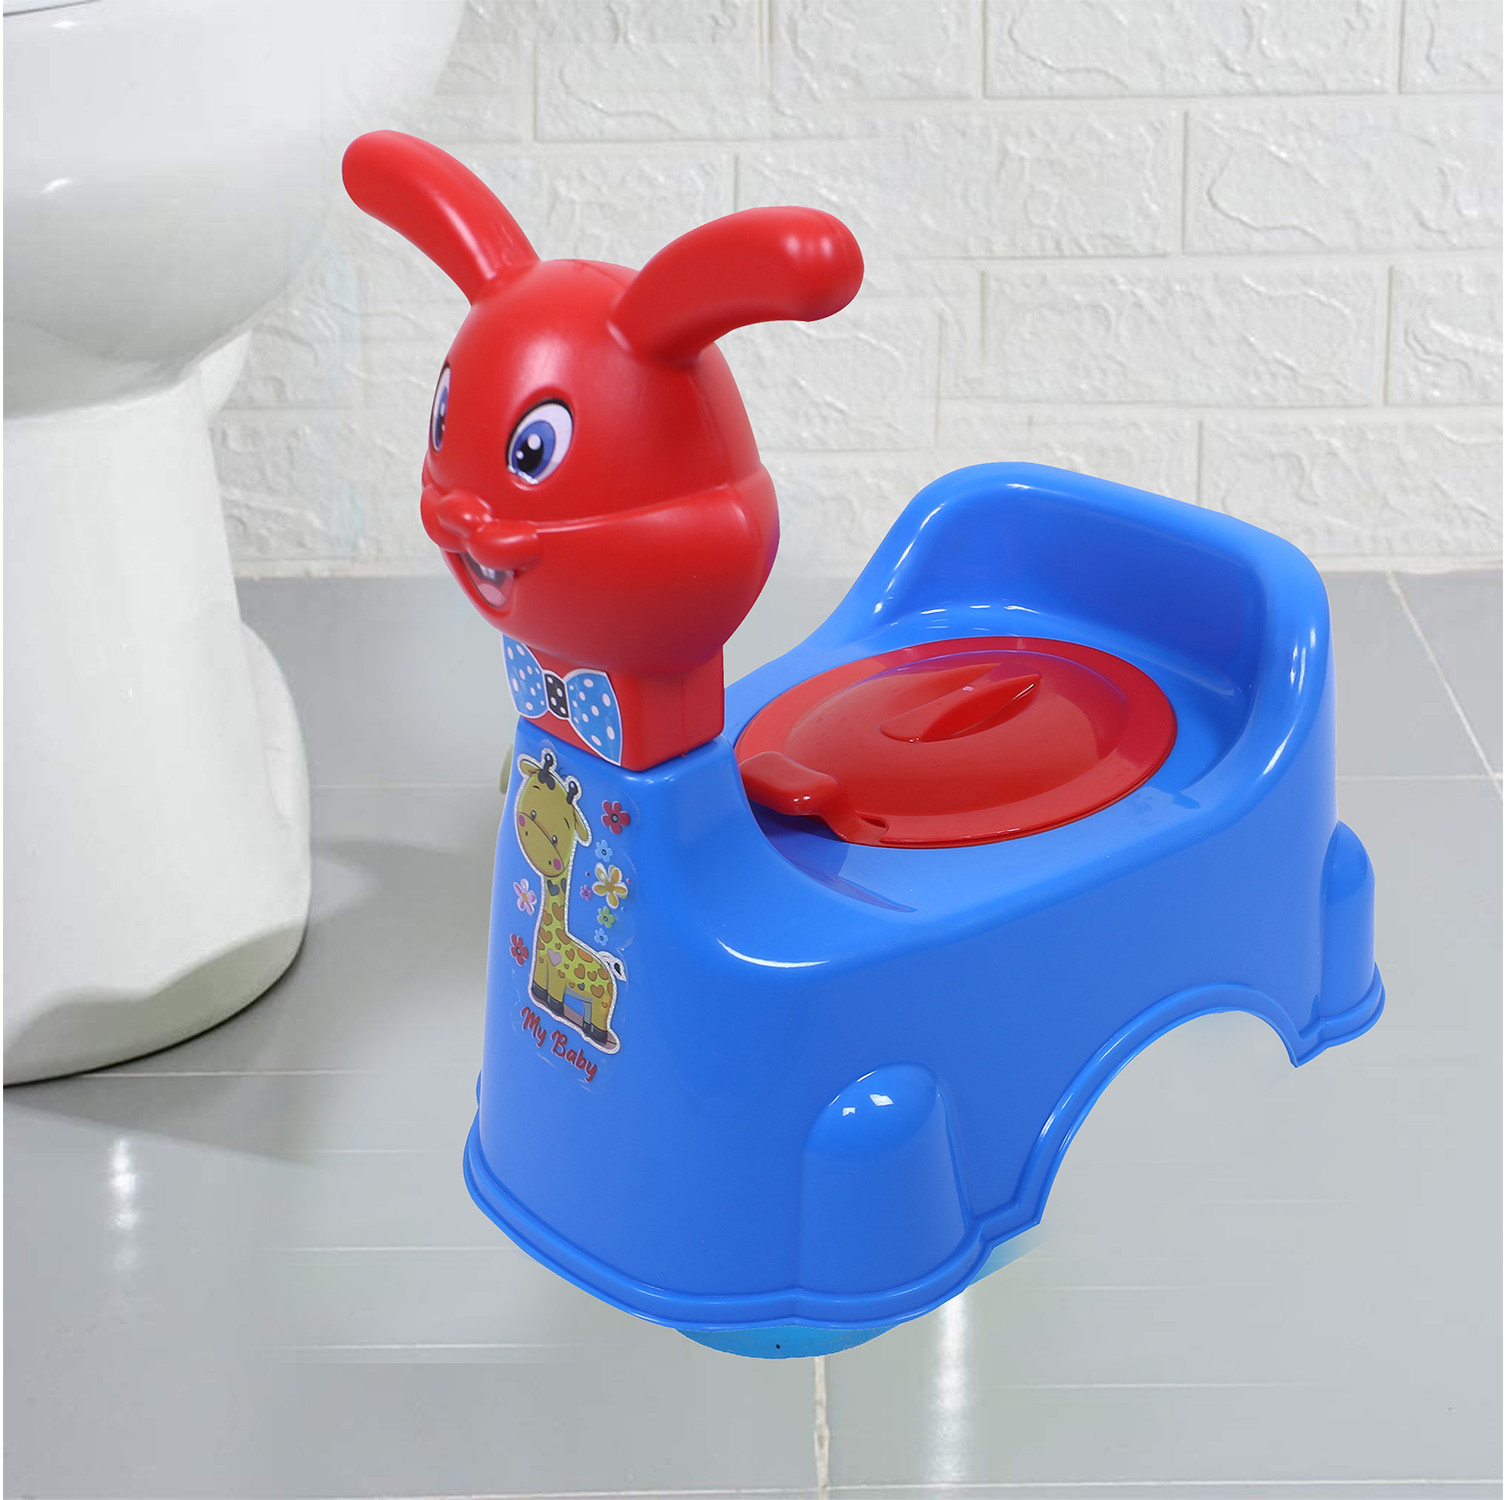 Kuber Industries Potty Toilet Trainer Seat | Plastic Potty Training Seat | Baby Potty Seat | Potty Seat For Child | Potty Training Seat for Kids | Rabbit Design | Red & Blue